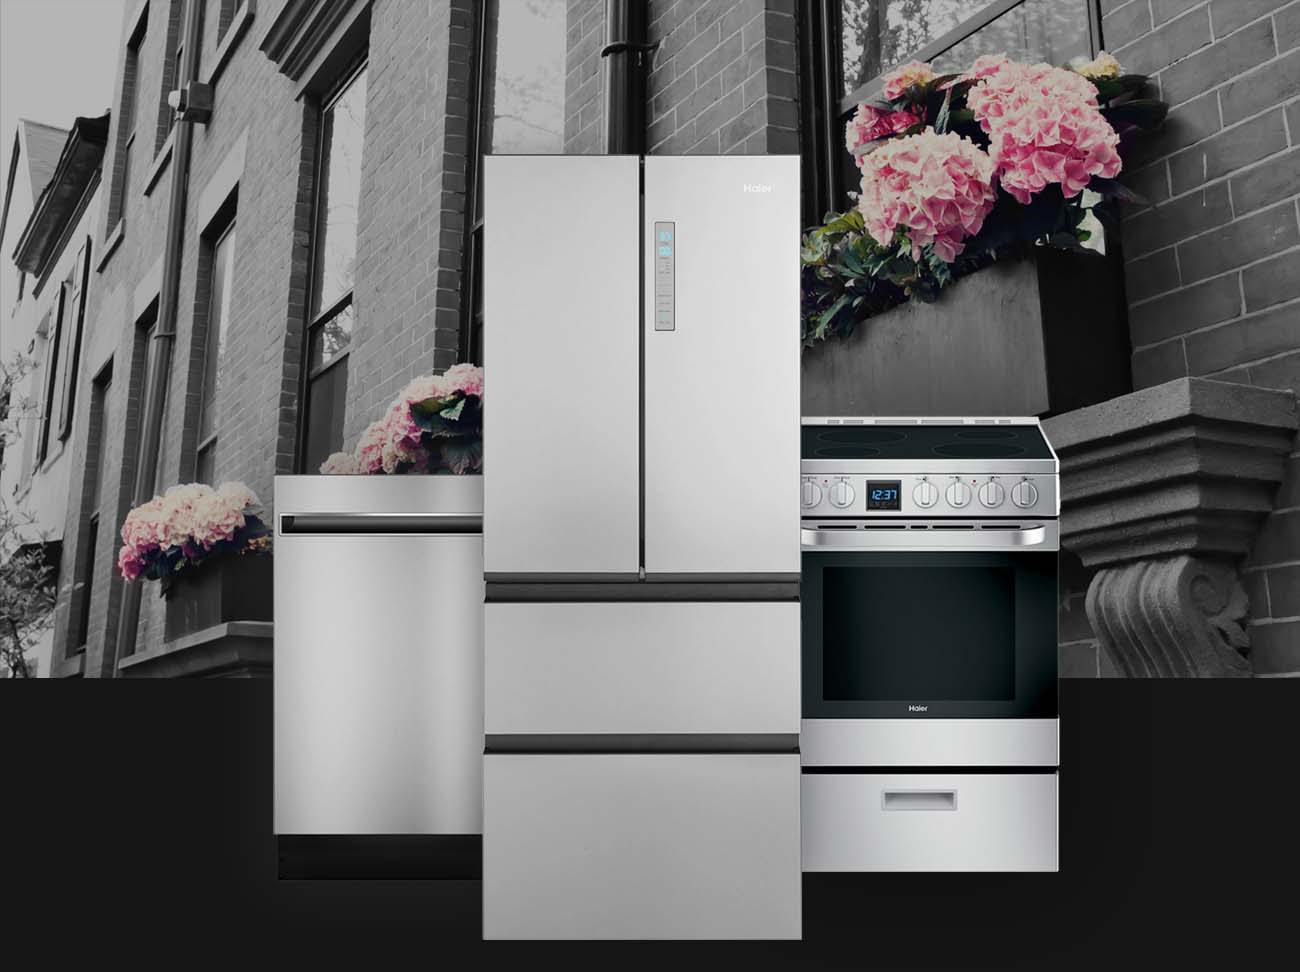  Haier small-space kitchen appliances layered over a background image of a downtown building with fresh spring flowers in large window garden boxes.